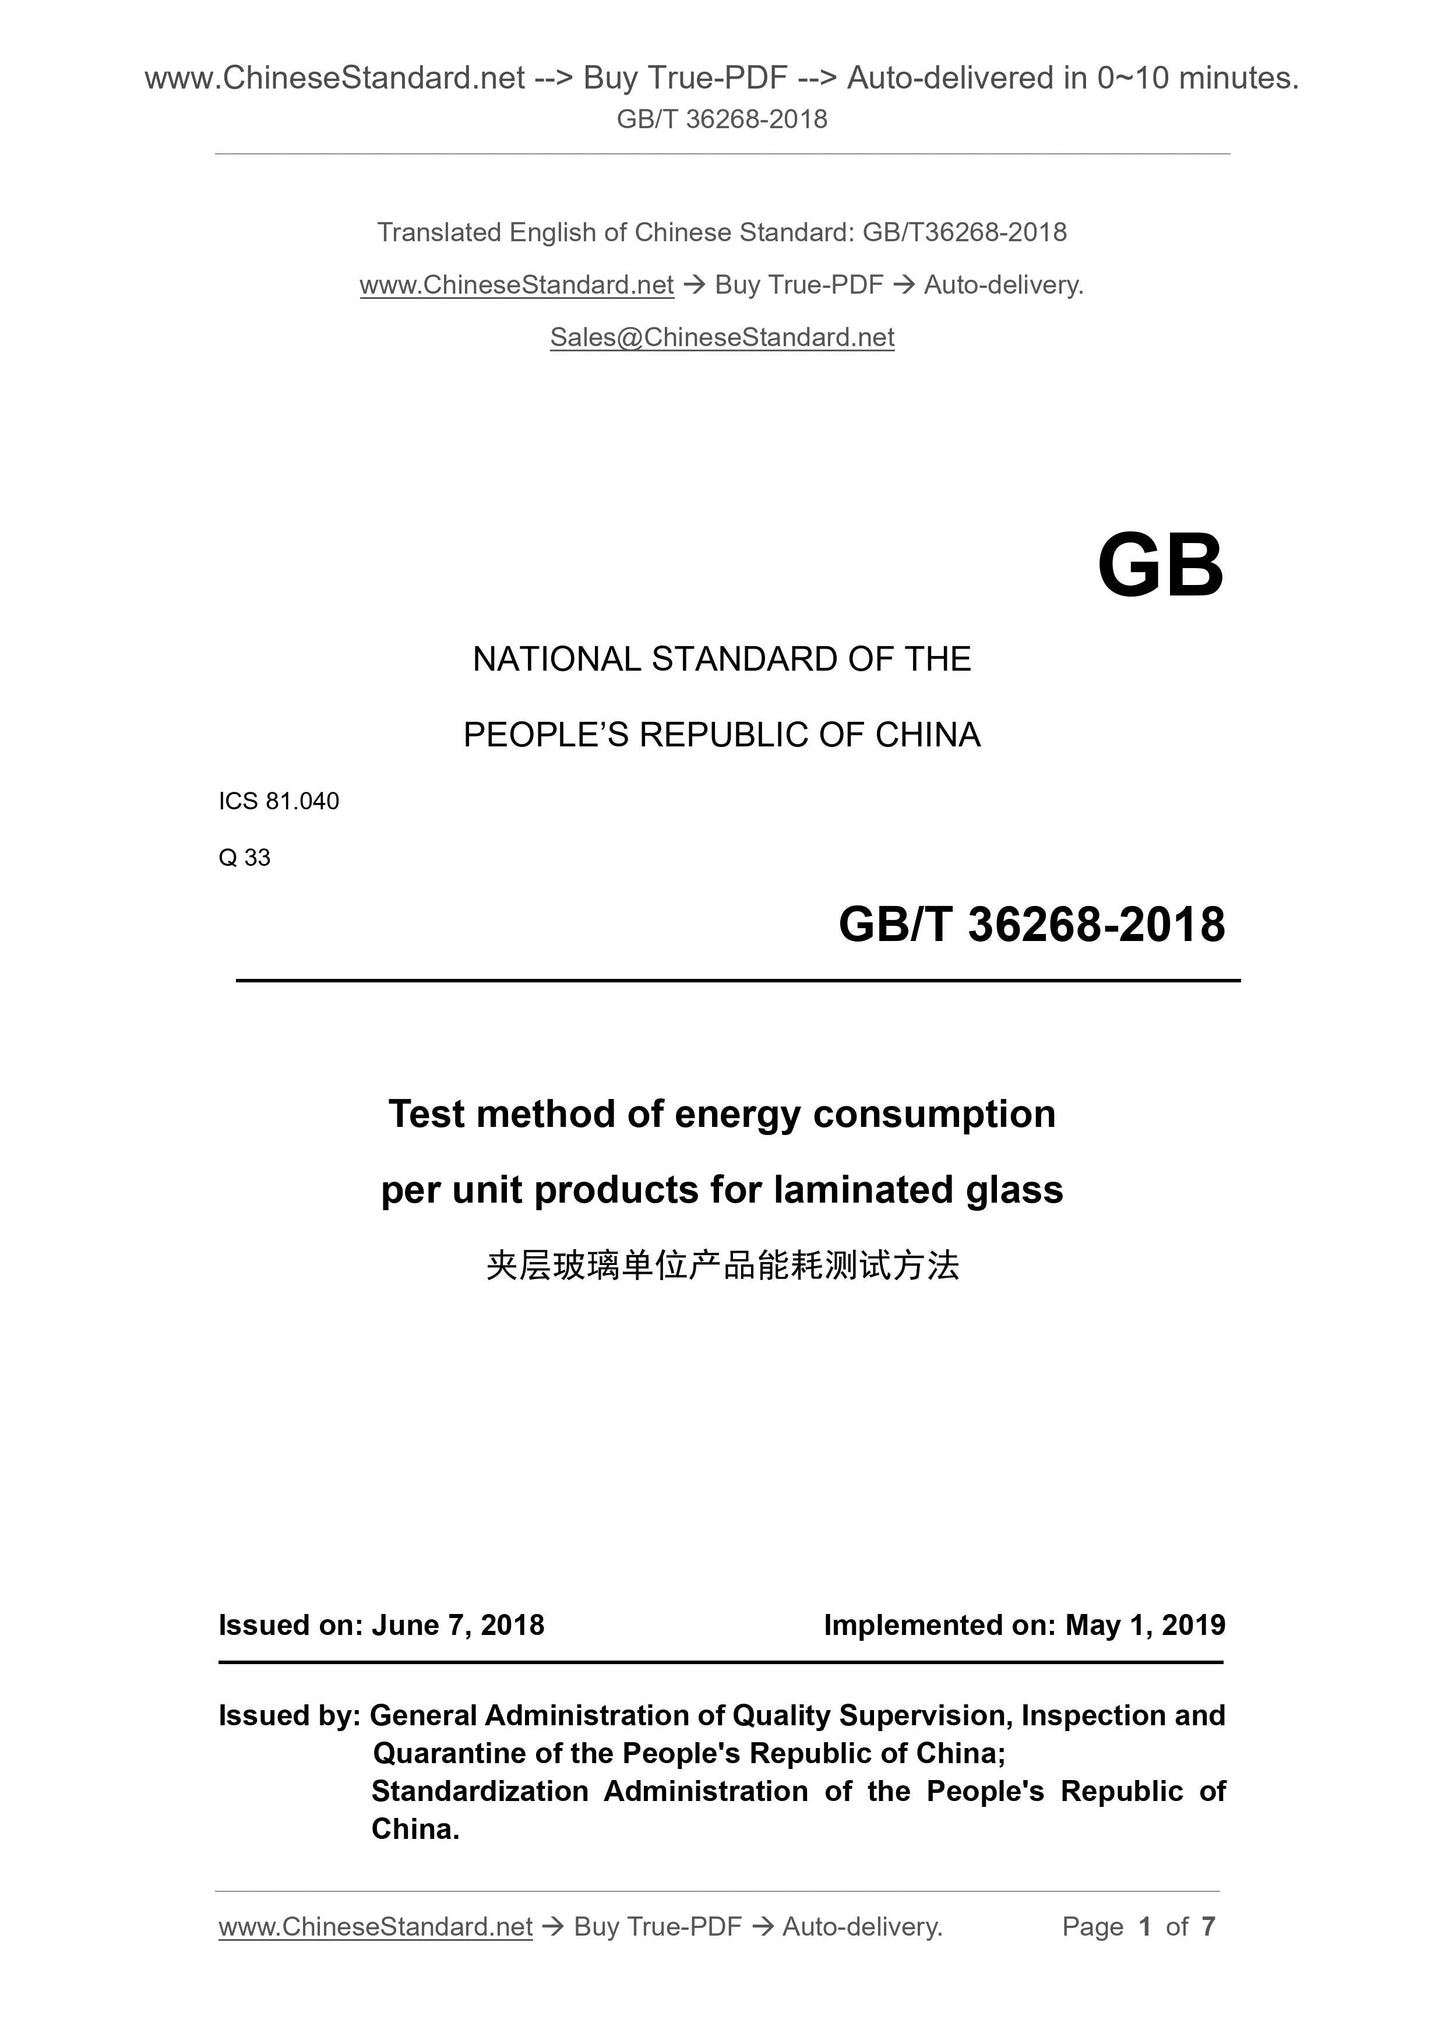 GB/T 36268-2018 Page 1